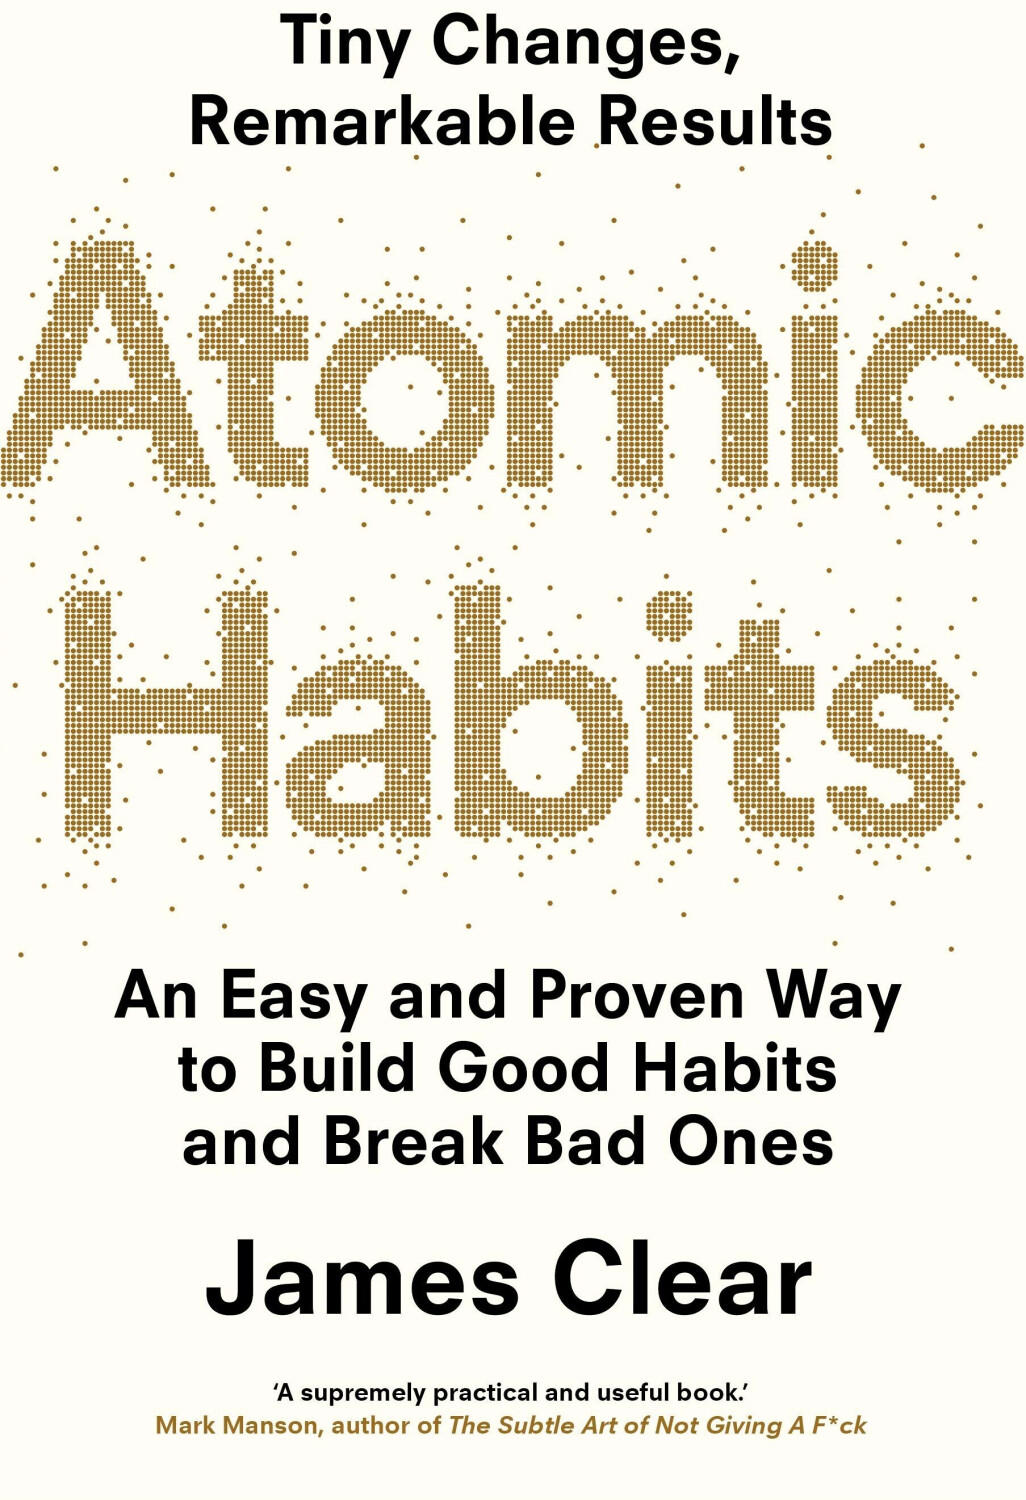 Atomic Habits (James Clear) [9781847941831]